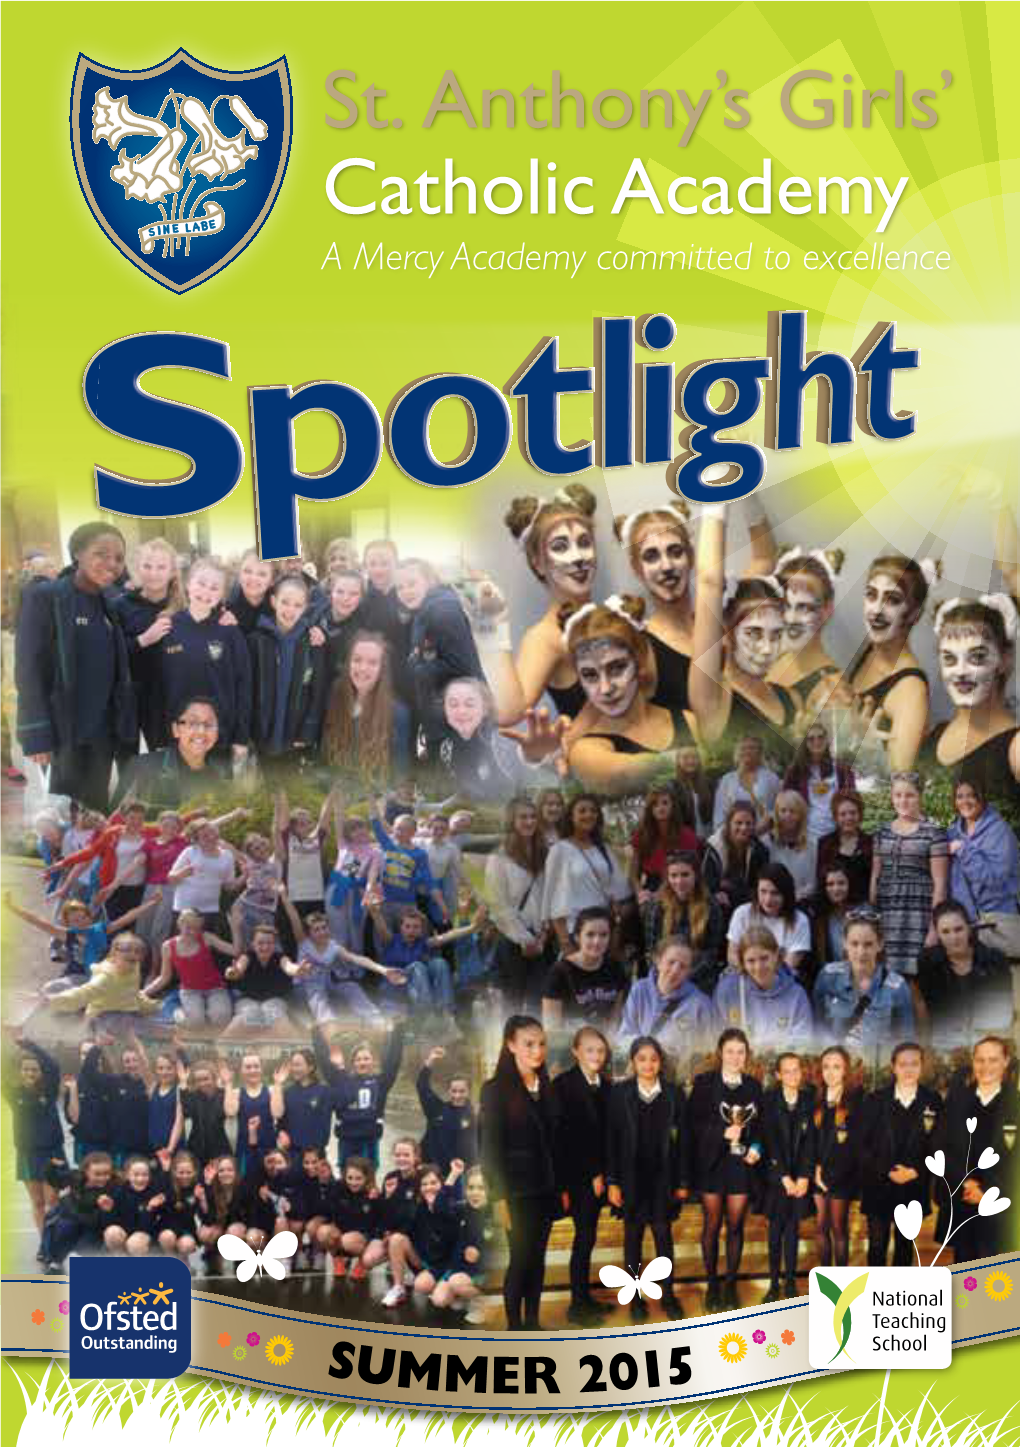 SUMMER 2015 Welcome to Spotlight on St Anthony’S